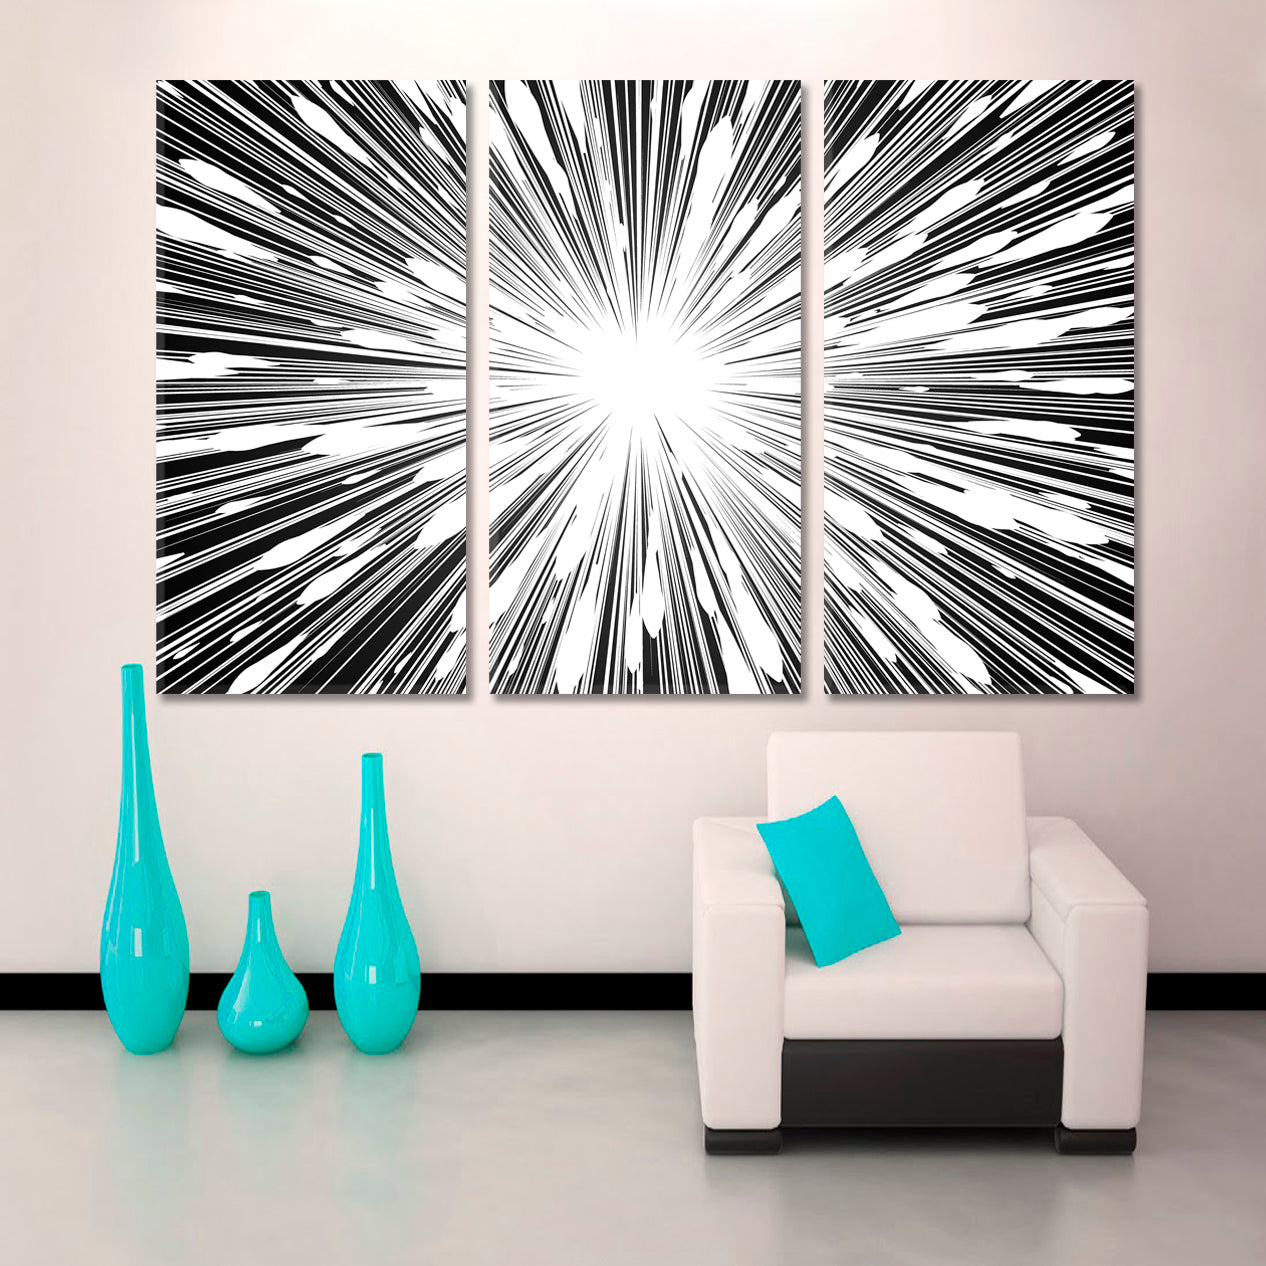 LIGHT RAYS Abstract Black and White Radial Lines Explosion Sun Ray Starburst Canvas Print Abstract Art Print Artesty 3 panels 36" x 24" 